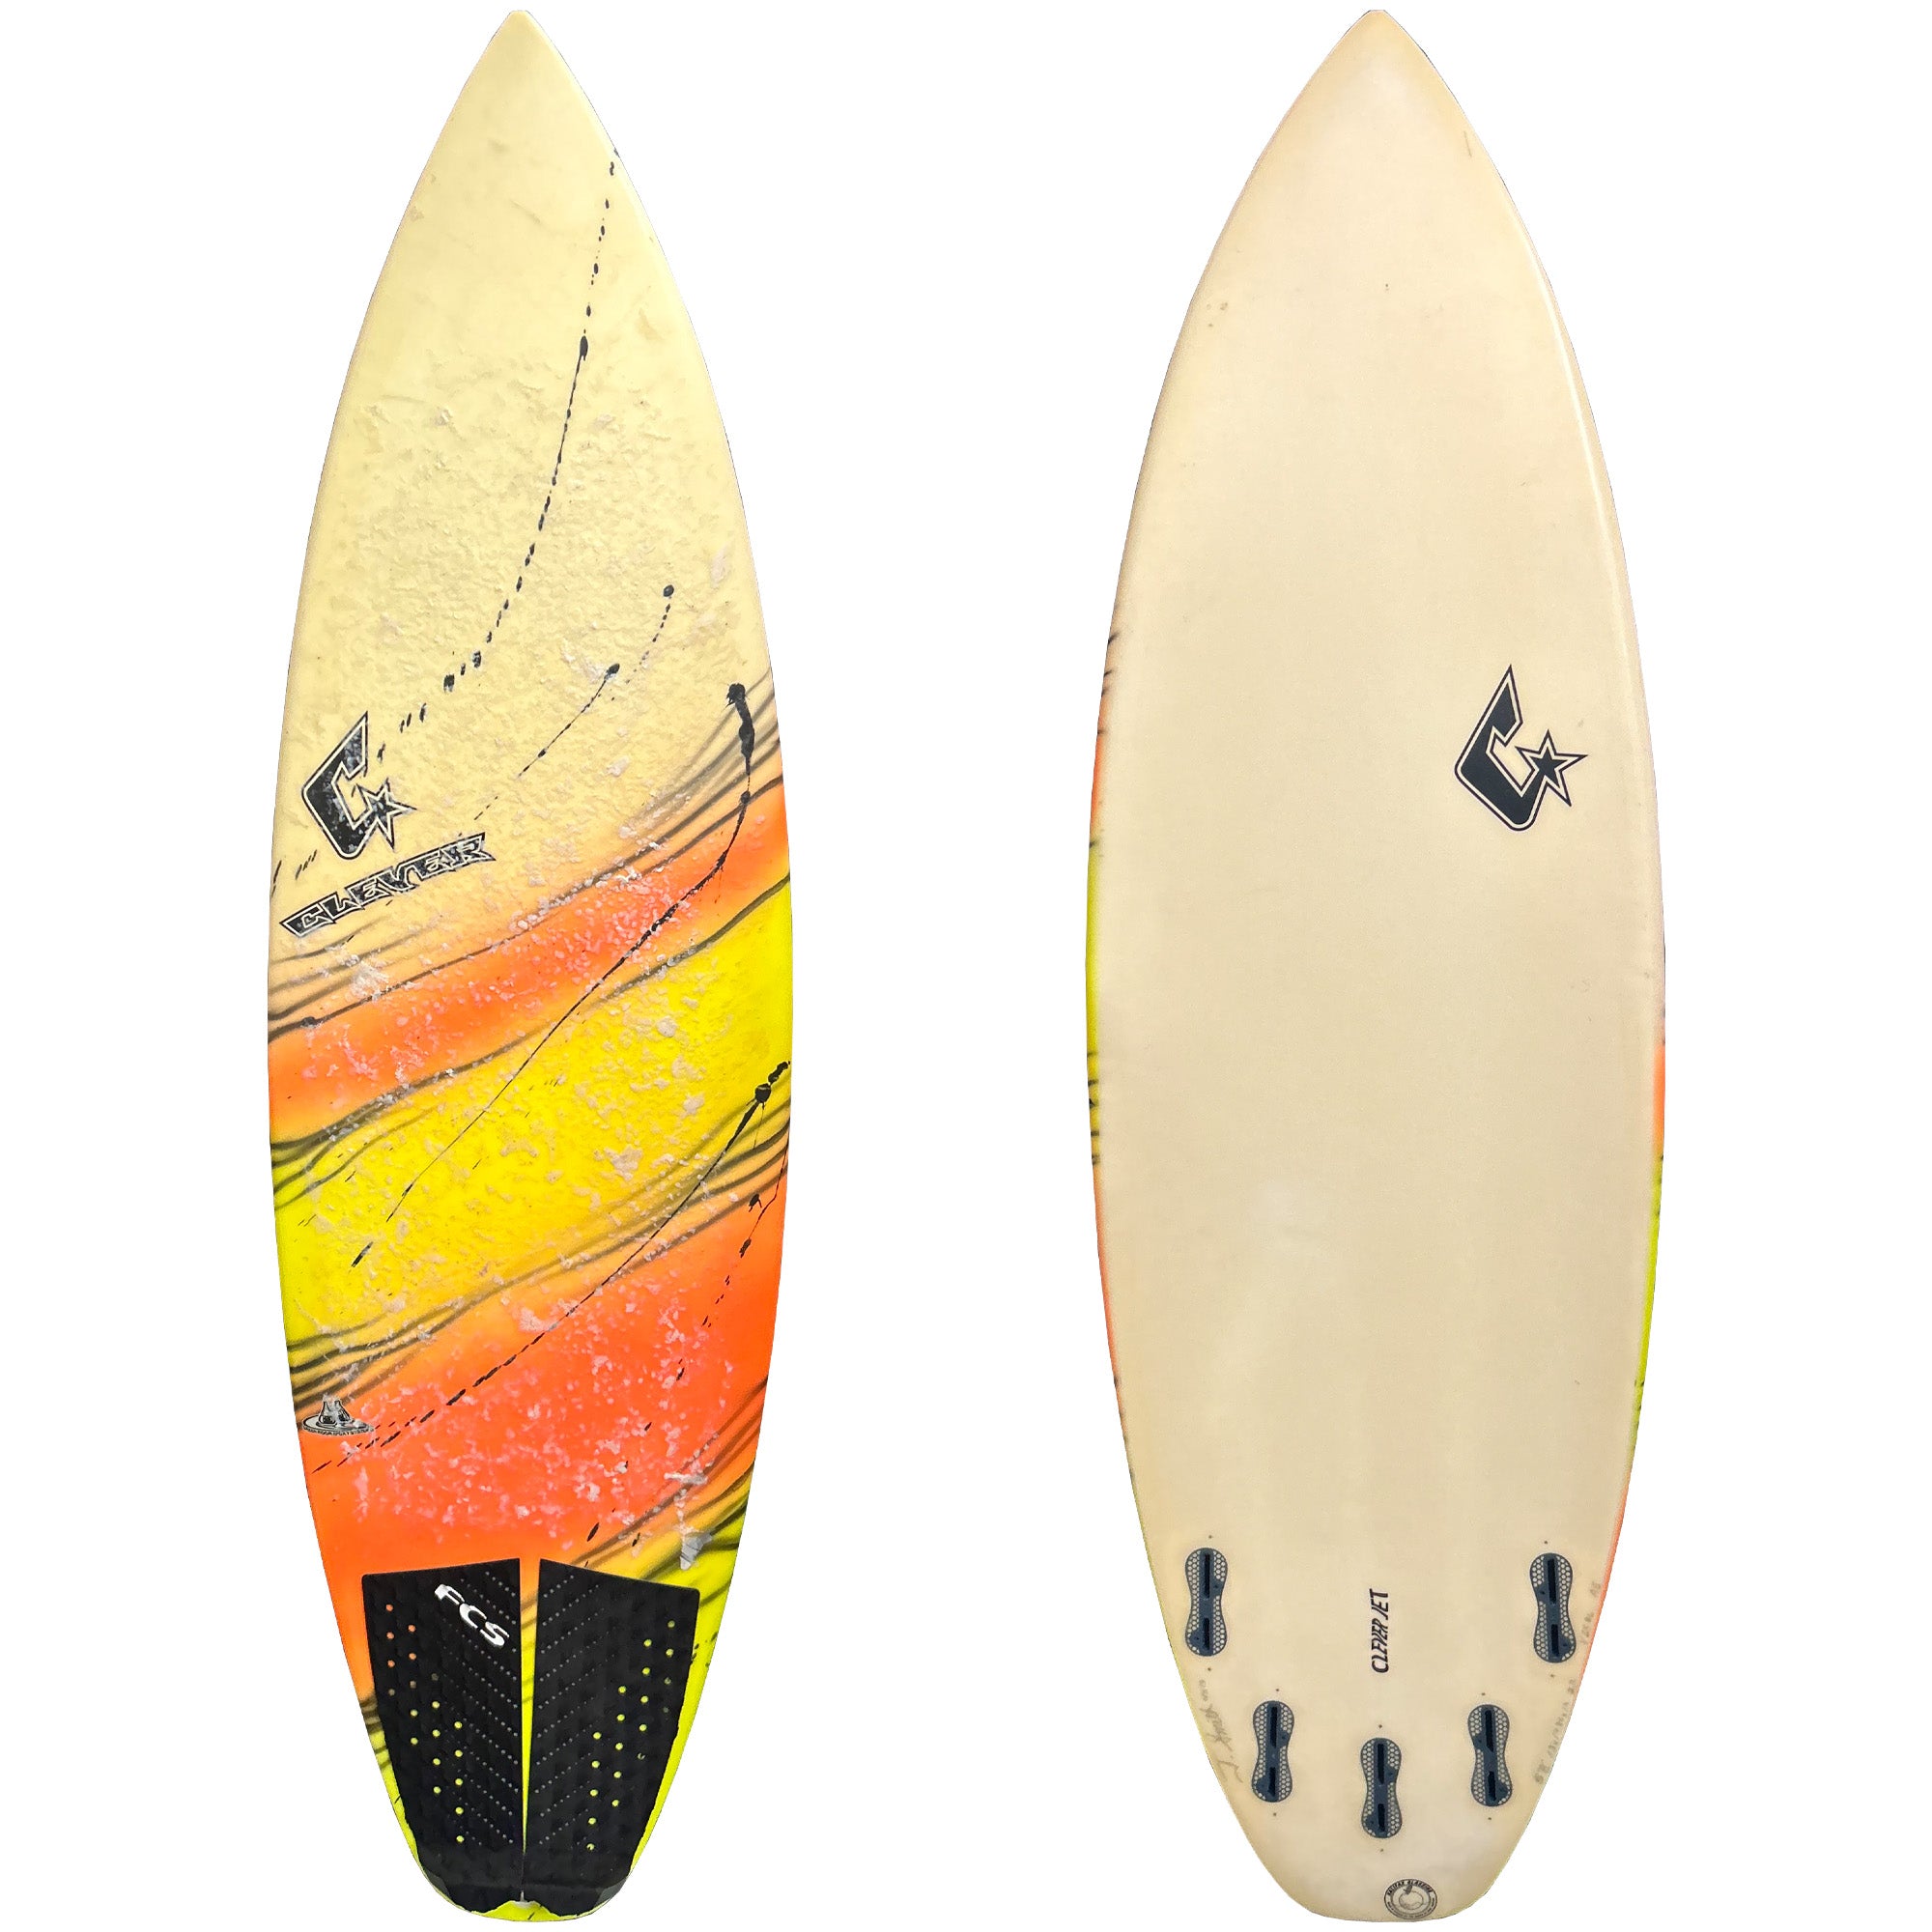 Clever Jet 5'8 Consignment Surfboard